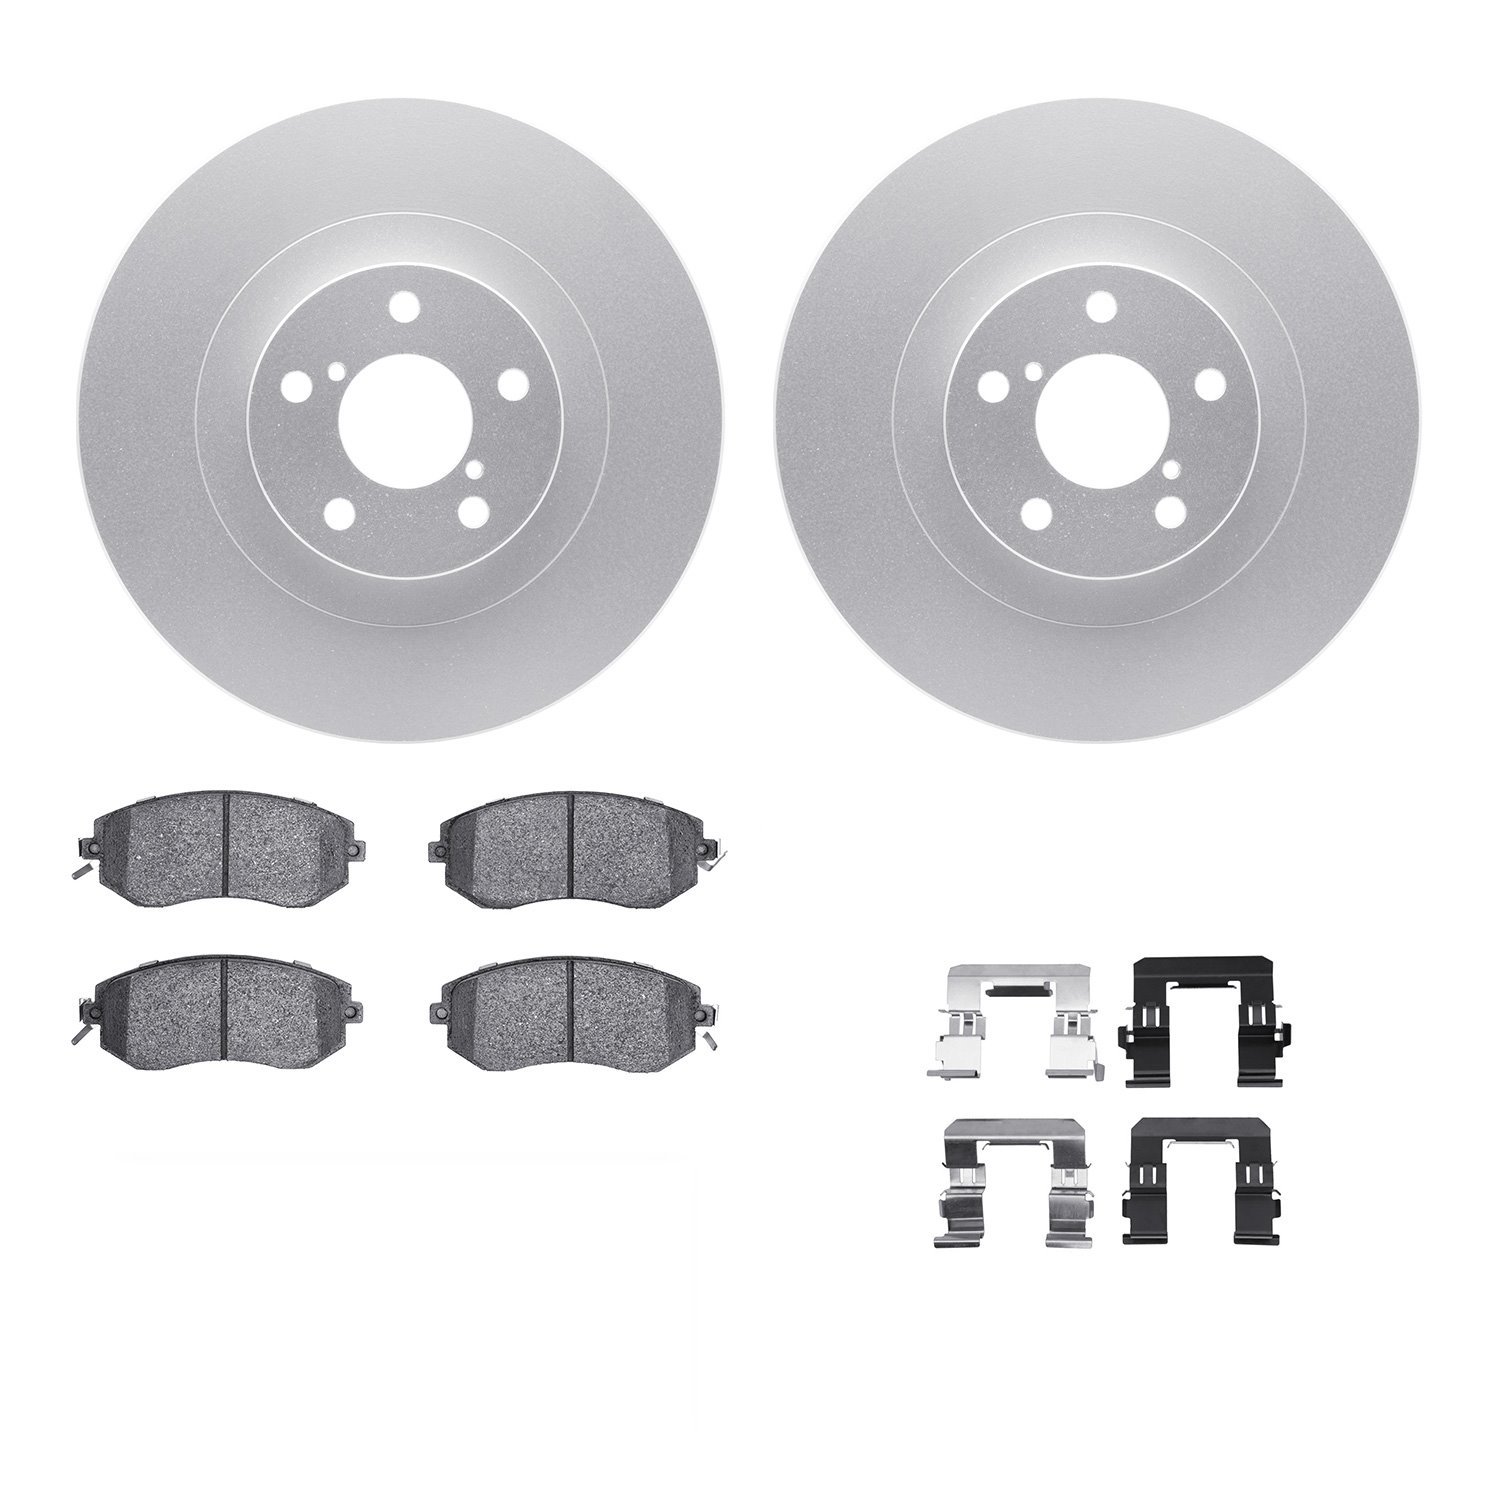 4312-13036 Geospec Brake Rotors with 3000-Series Ceramic Brake Pads & Hardware, Fits Select Multiple Makes/Models, Position: Fro